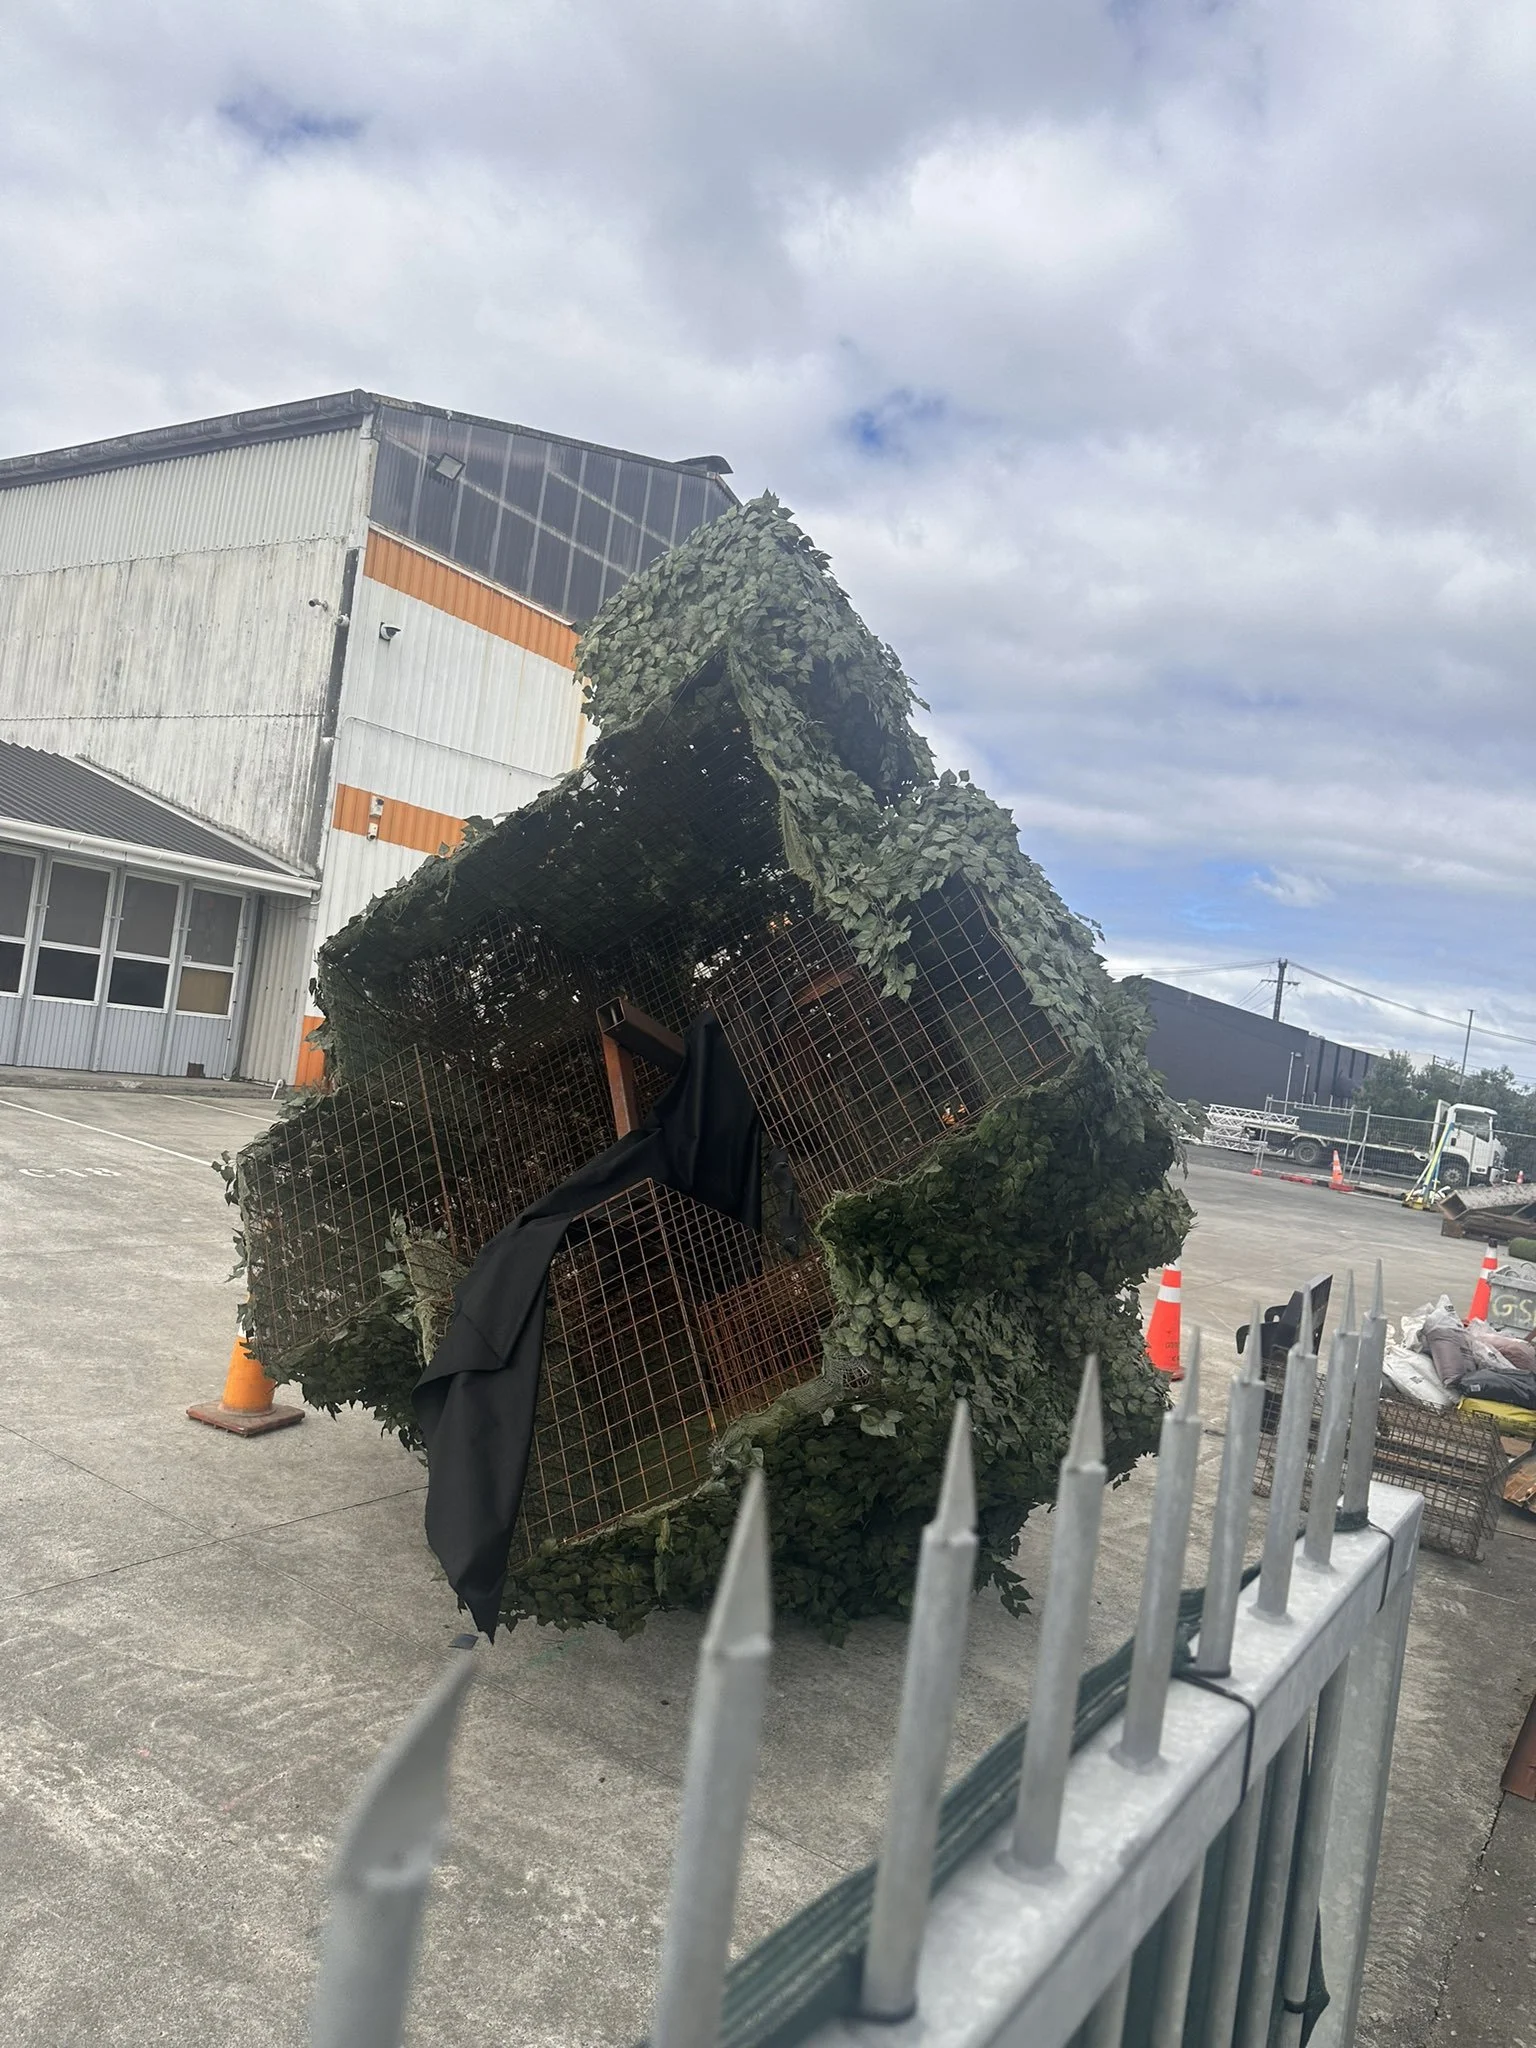 Cubic trees began to be brought to the set of the Minecraft film adaptation